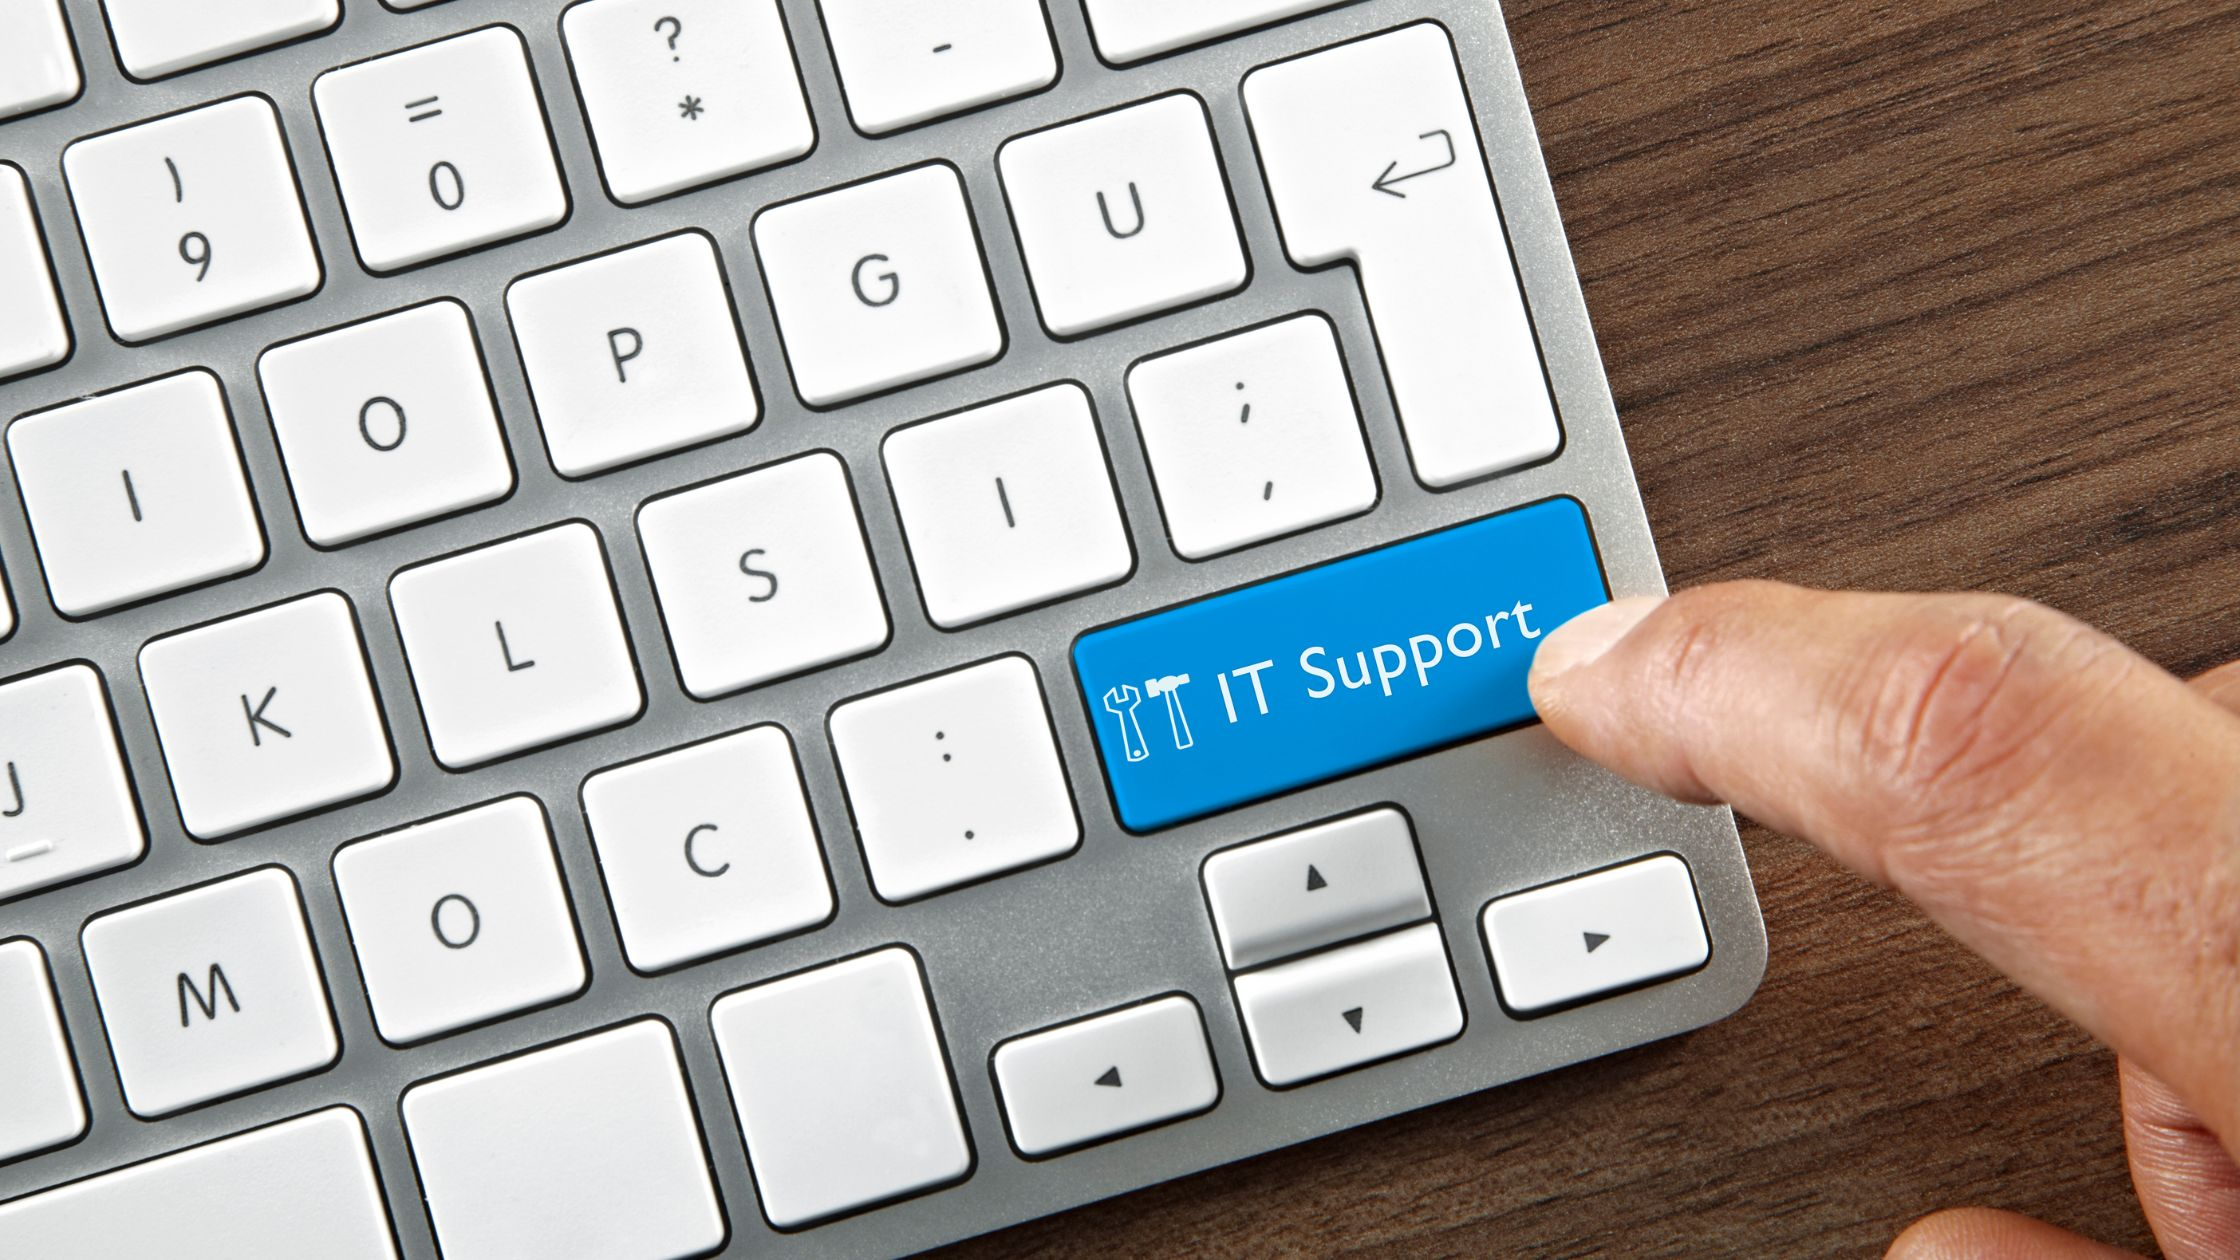 finger clicking button on keyboard that says "IT support" 